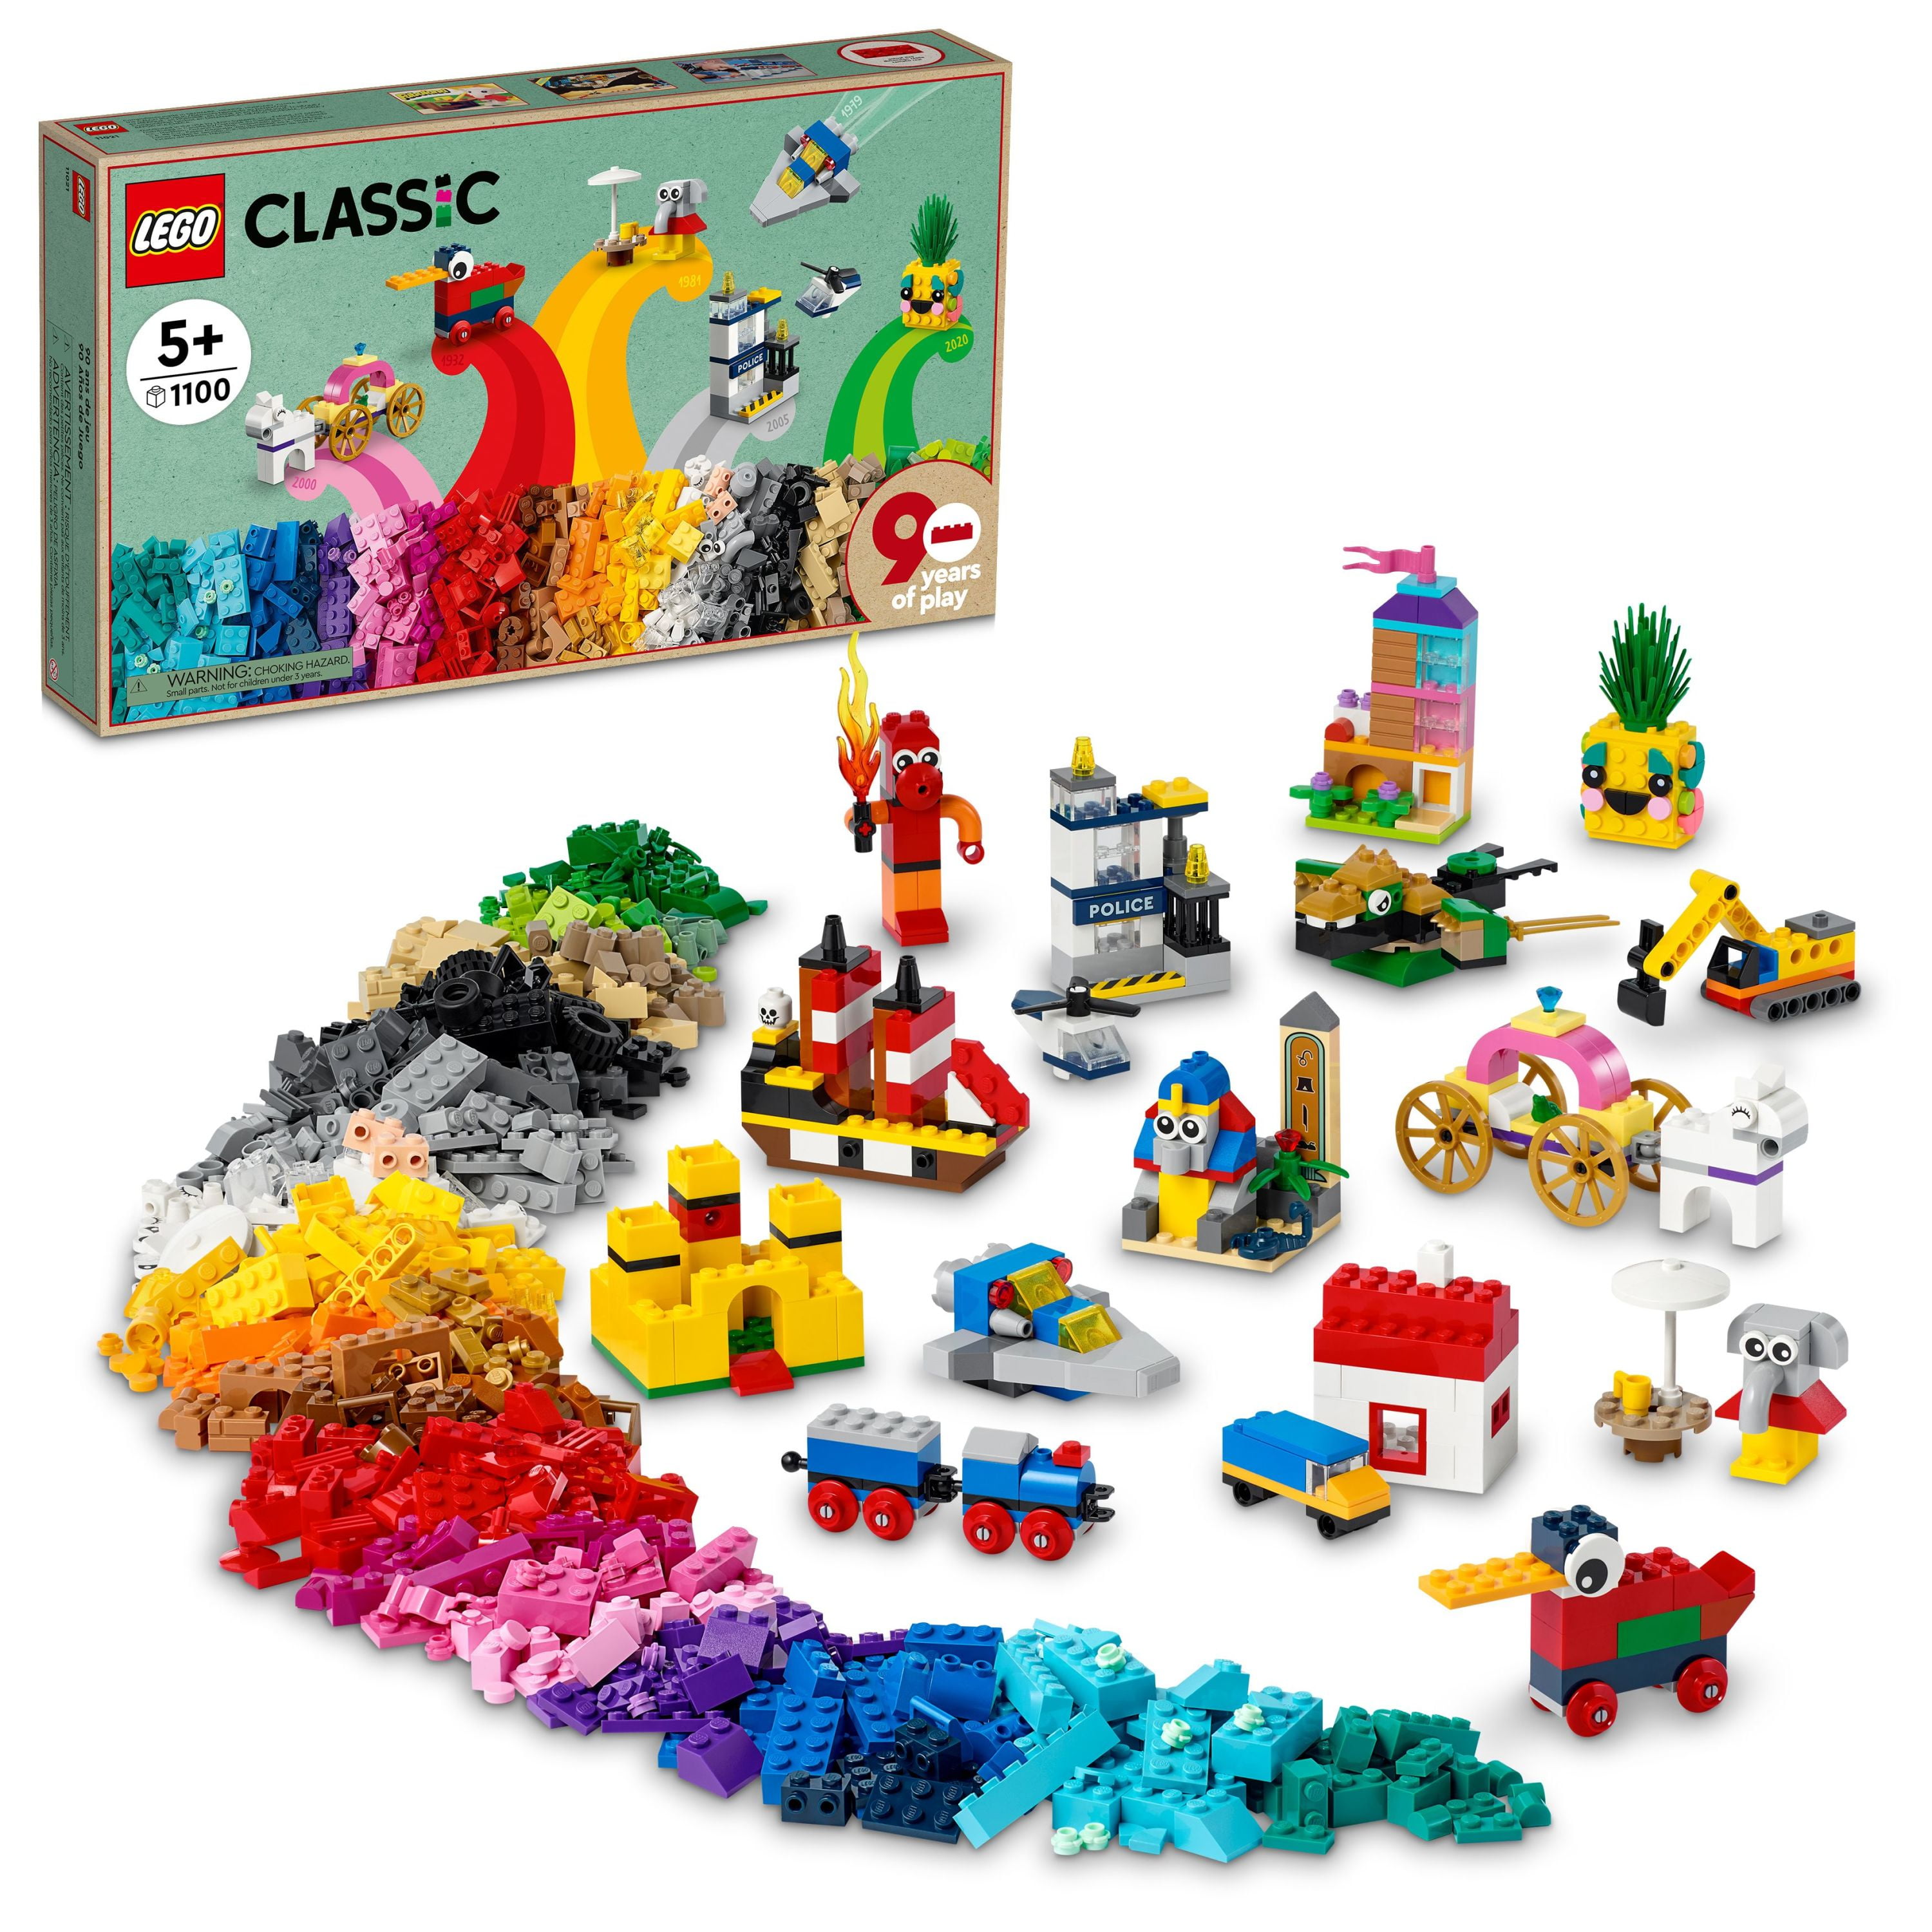 Details about   Building Blocks Sets Creator Expert 15037 Downtown Diners Street Model Kids Toys 